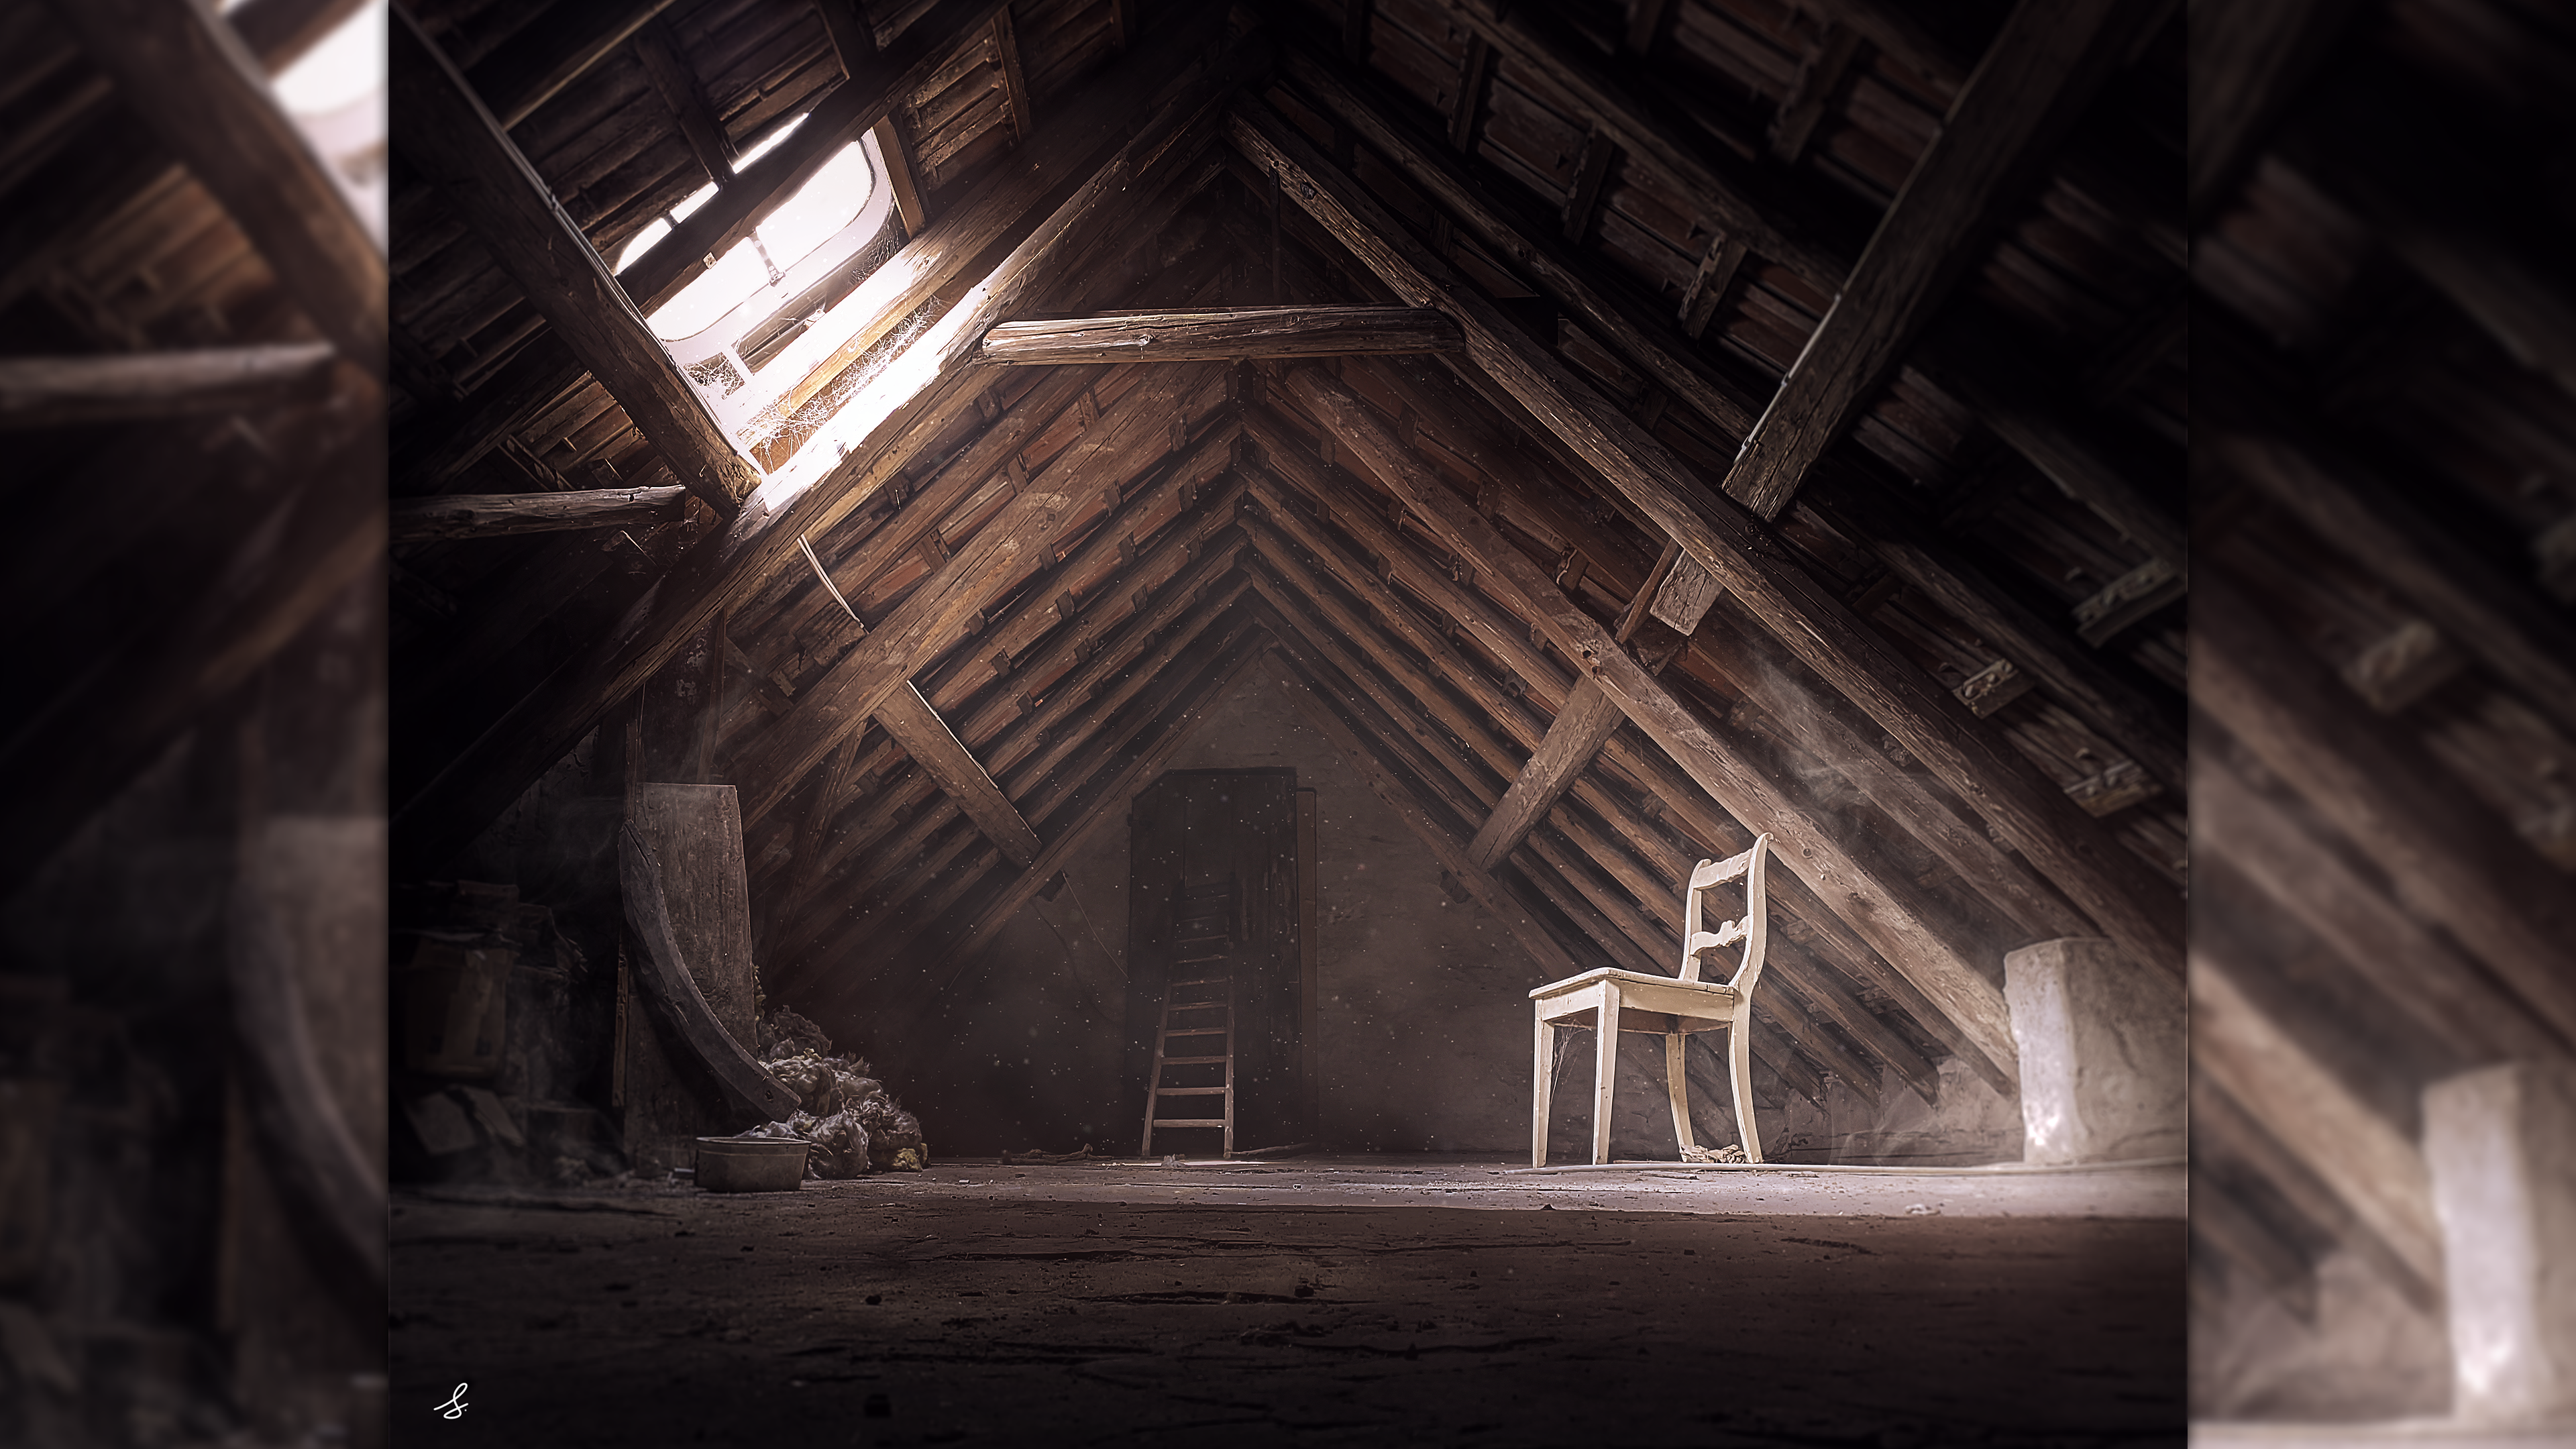 Wallpaper, emotion, ancient, photography, attics, horror, isolation, dust, vintage, wooden surface, wood, old building, Photohop, light effects, grunge, decay 3840x2160